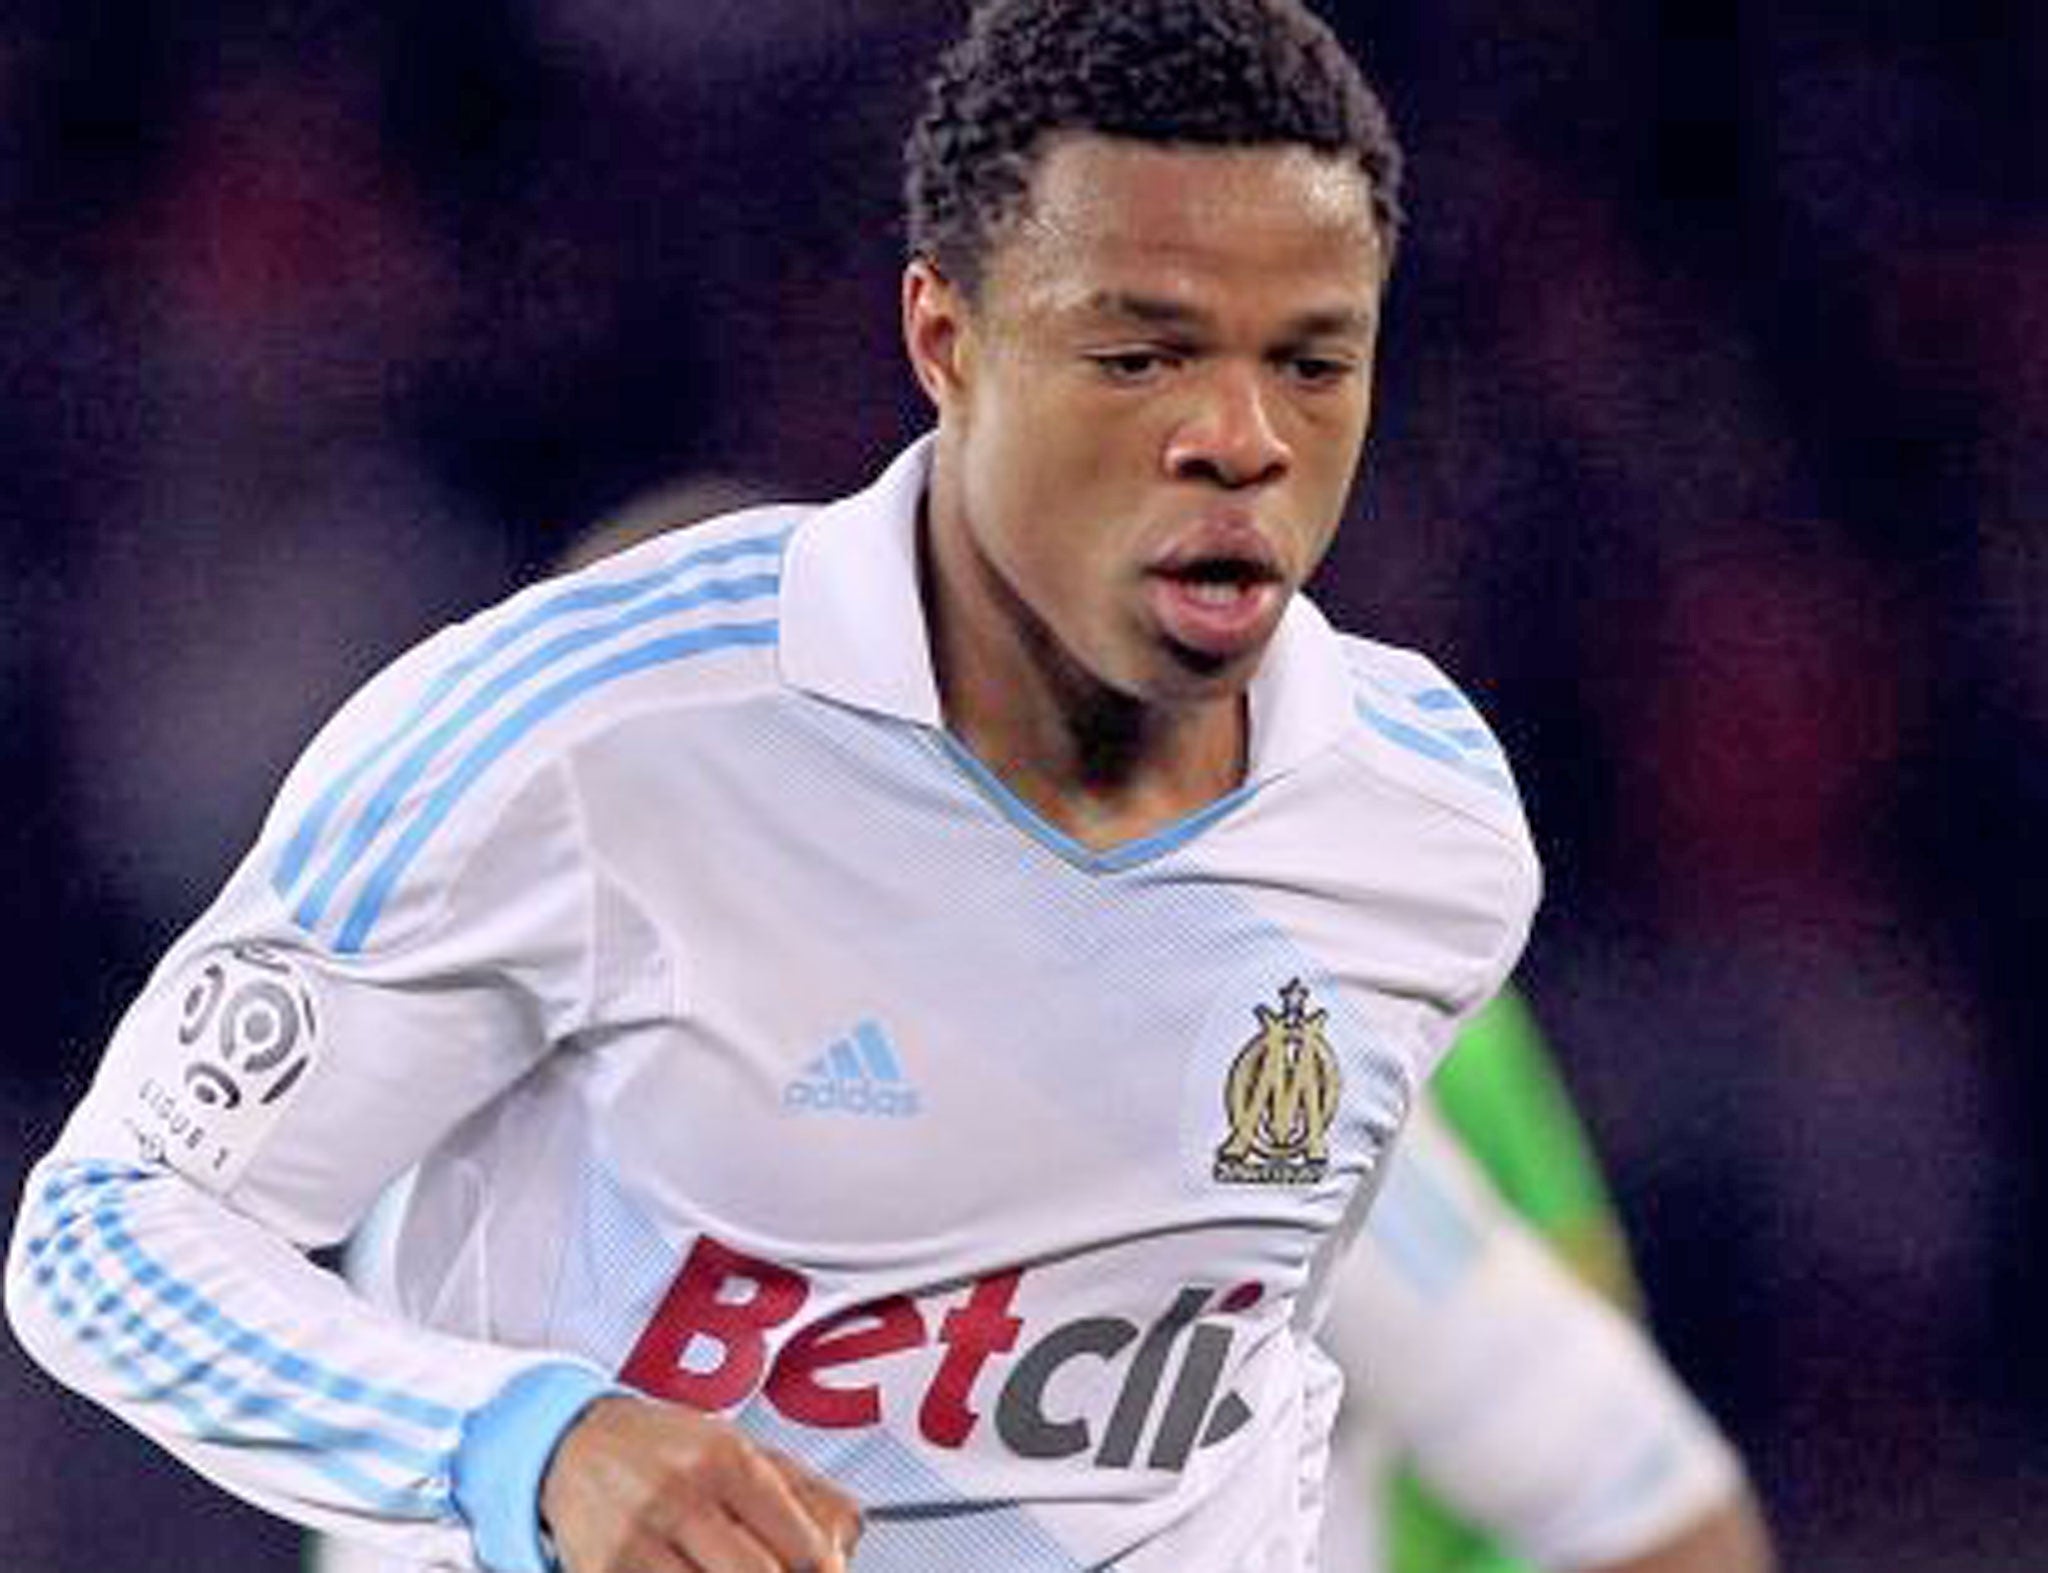 QPR have agreed a fee of £8m with Marseilles for Loic Remy